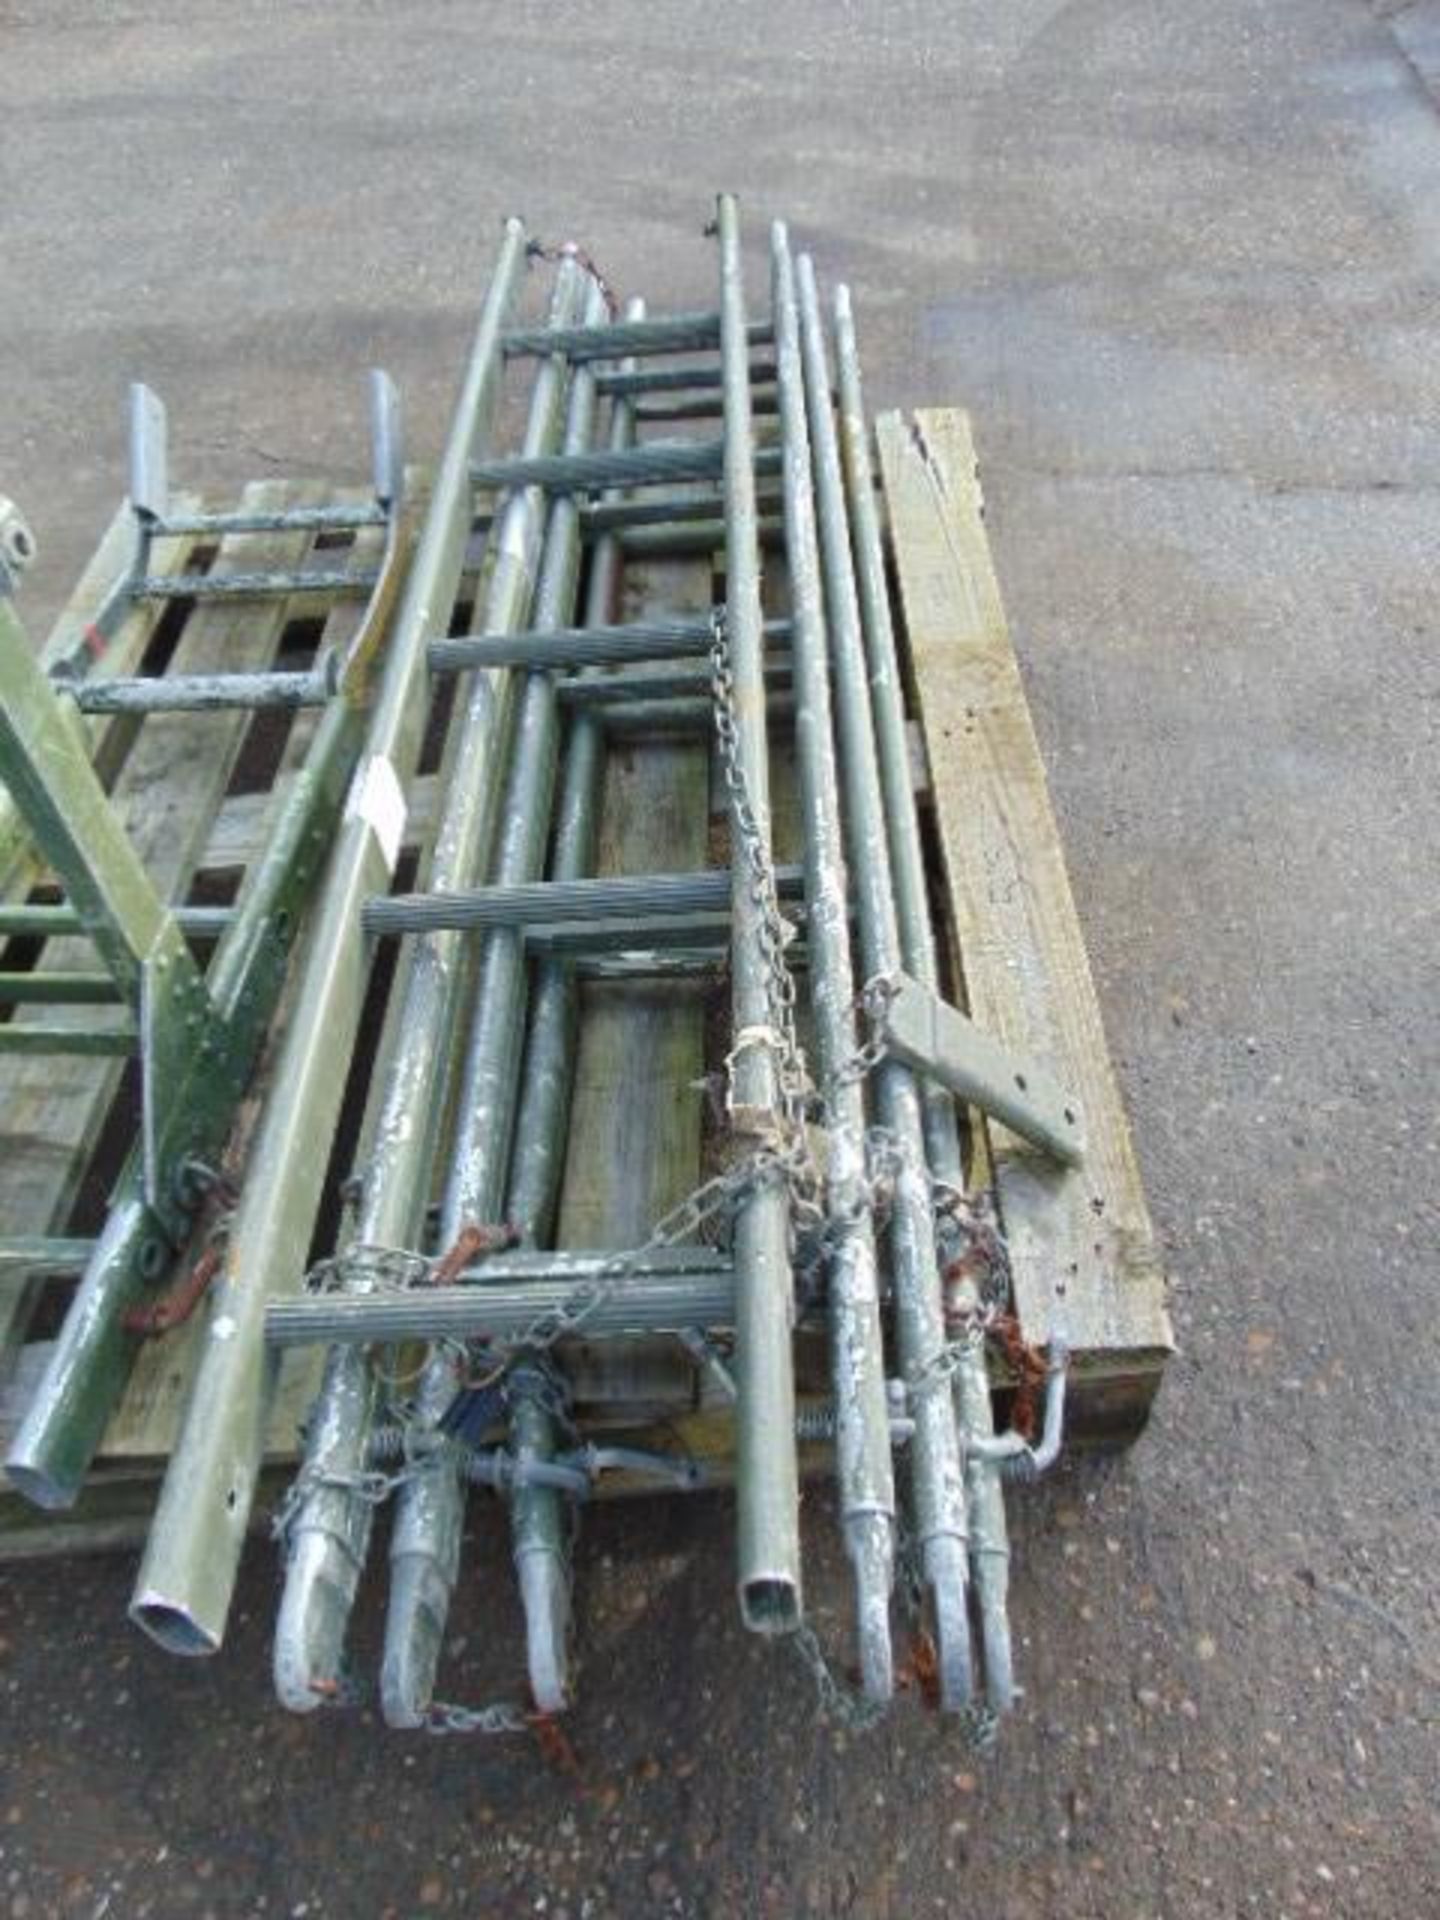 4 Section Military Aluminium Scaling/Assault Ladder with Ridge Hook and Roller Attachments - Image 2 of 4